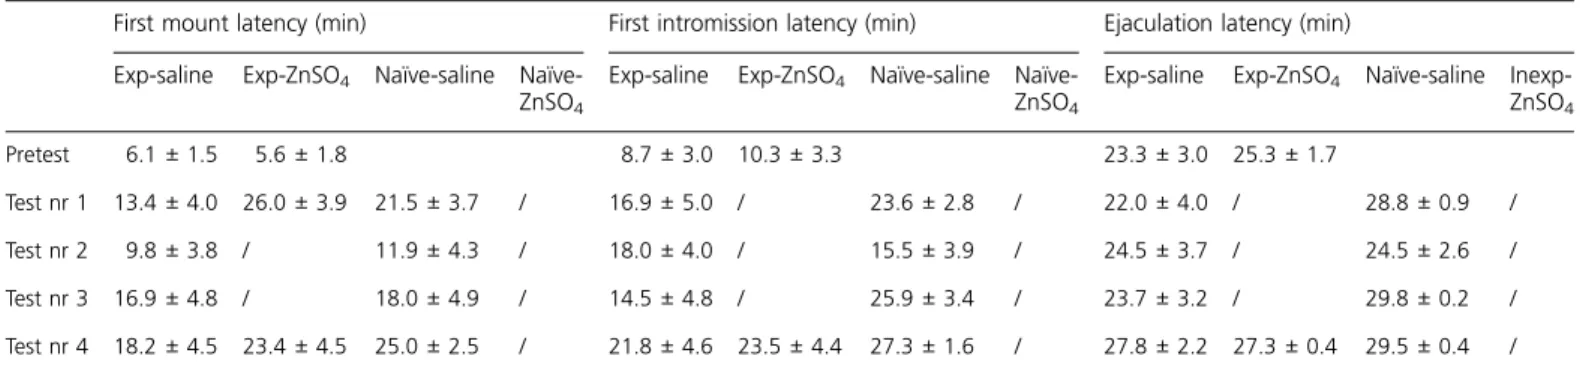 Table 1 Mount and intromission latencies in minutes during pair tests with an estrous female